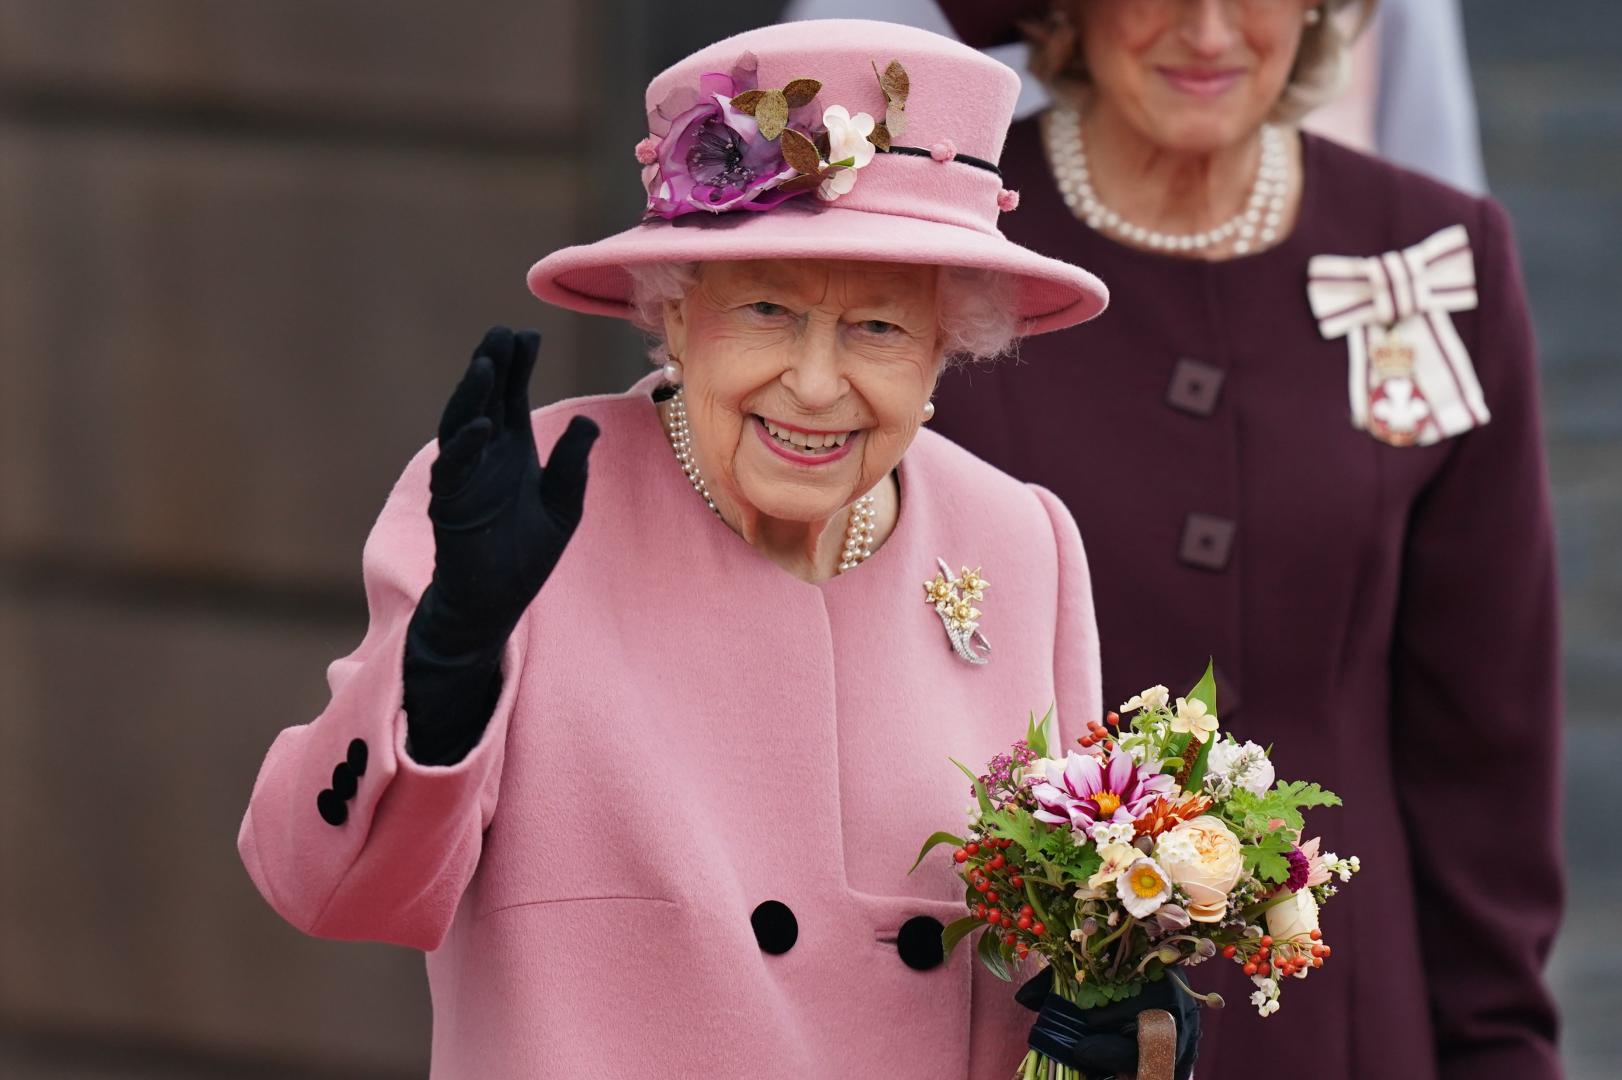 Her Majesty The Queen holding flowers and waving